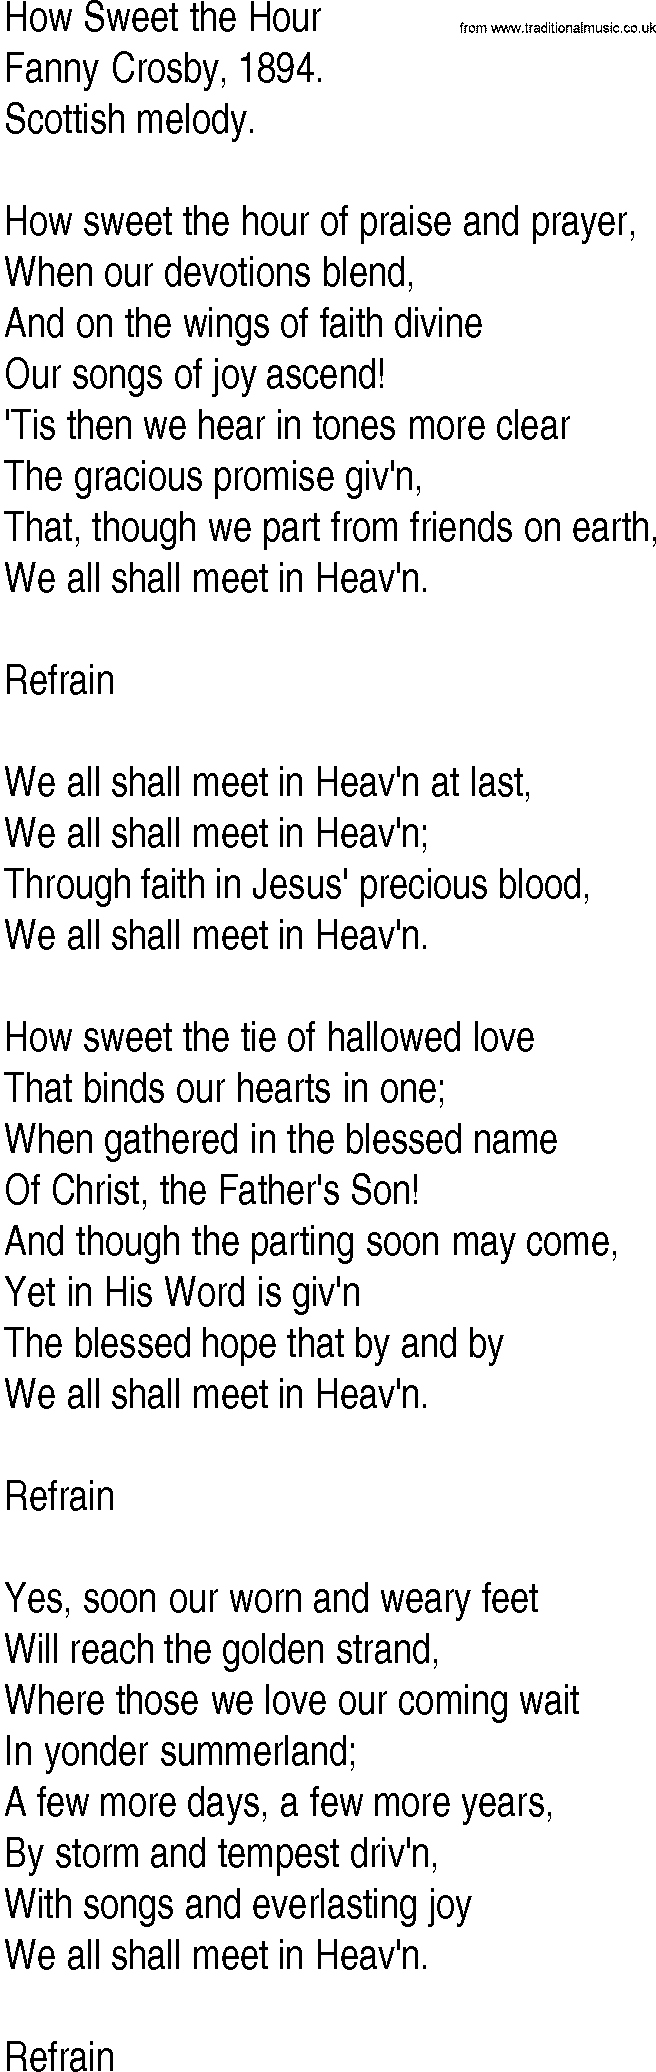 Hymn and Gospel Song: How Sweet the Hour by Fanny Crosby lyrics